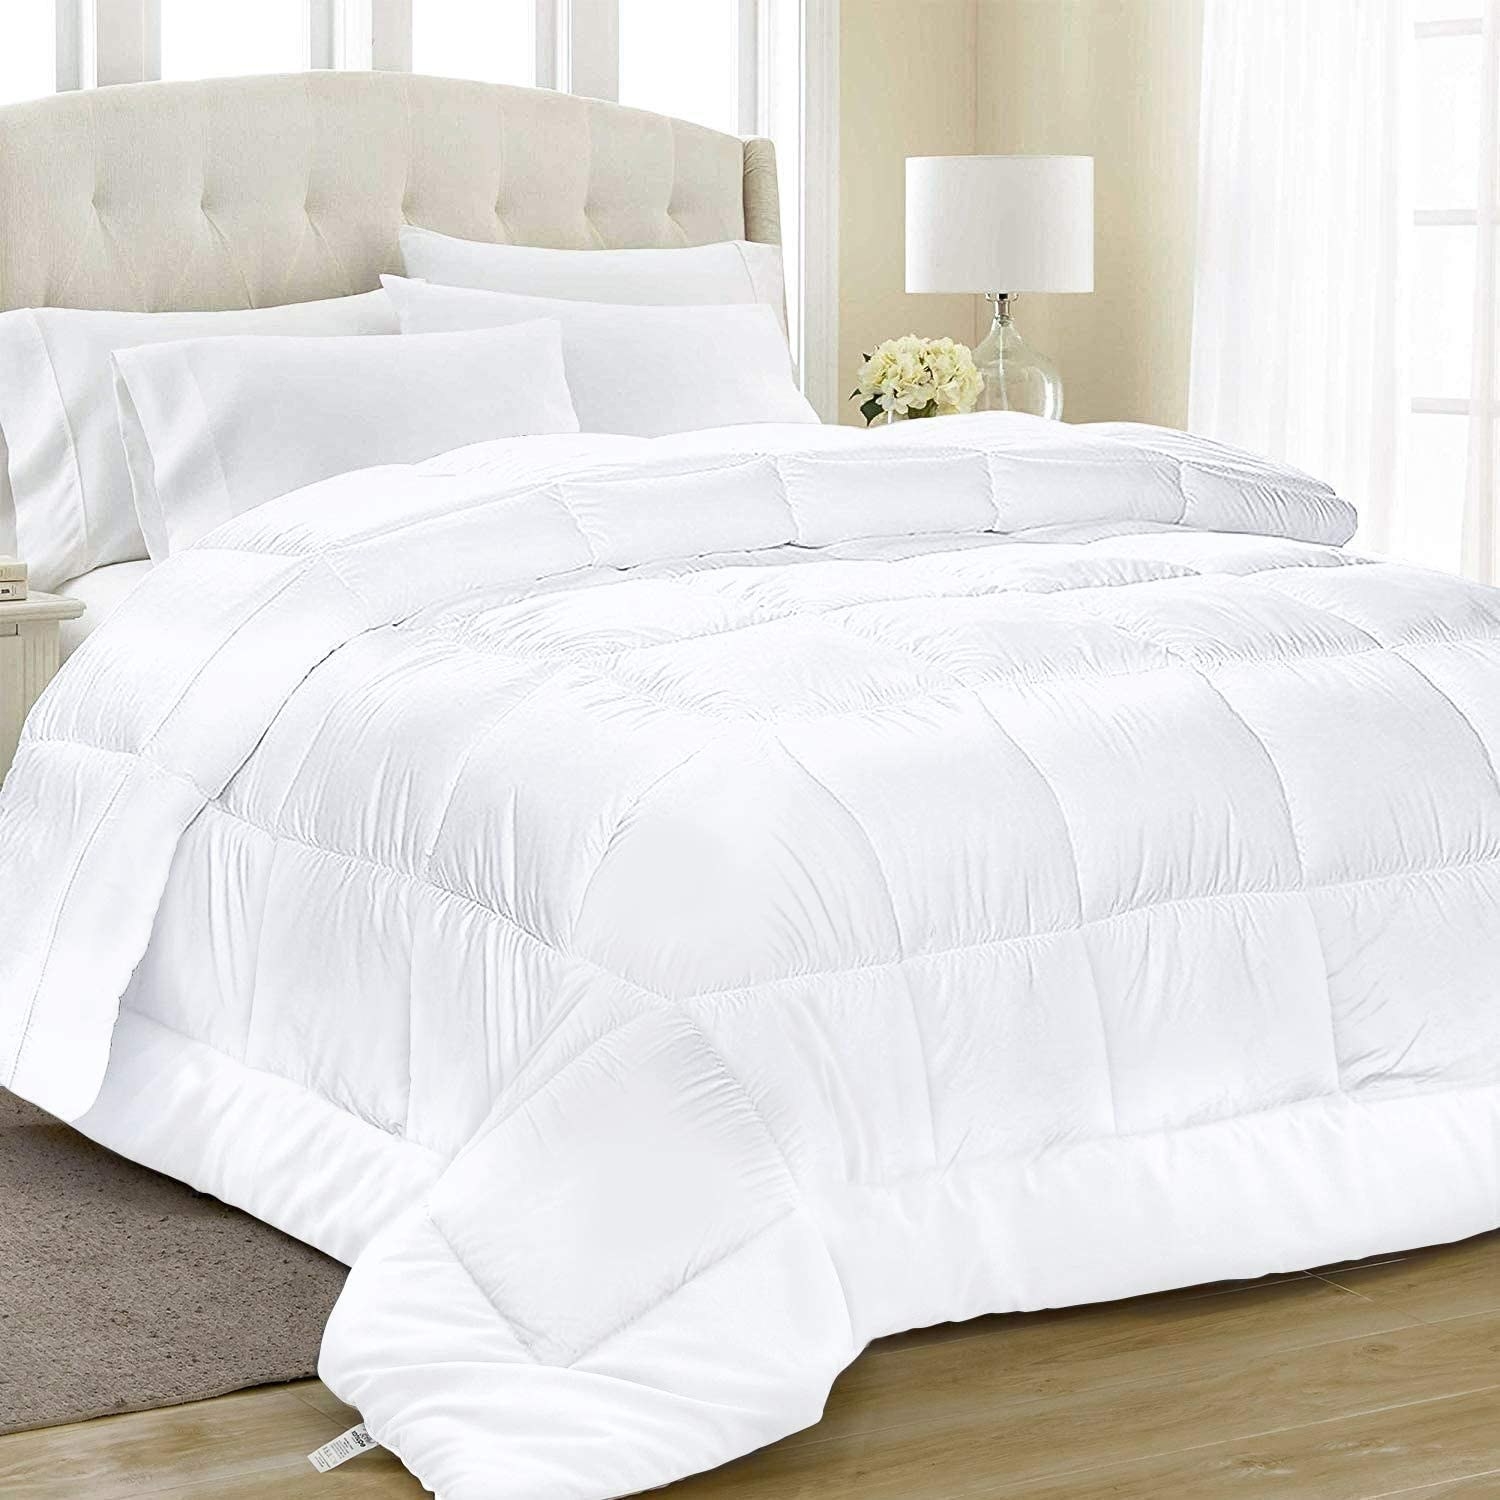 The large comforter draped over a bed